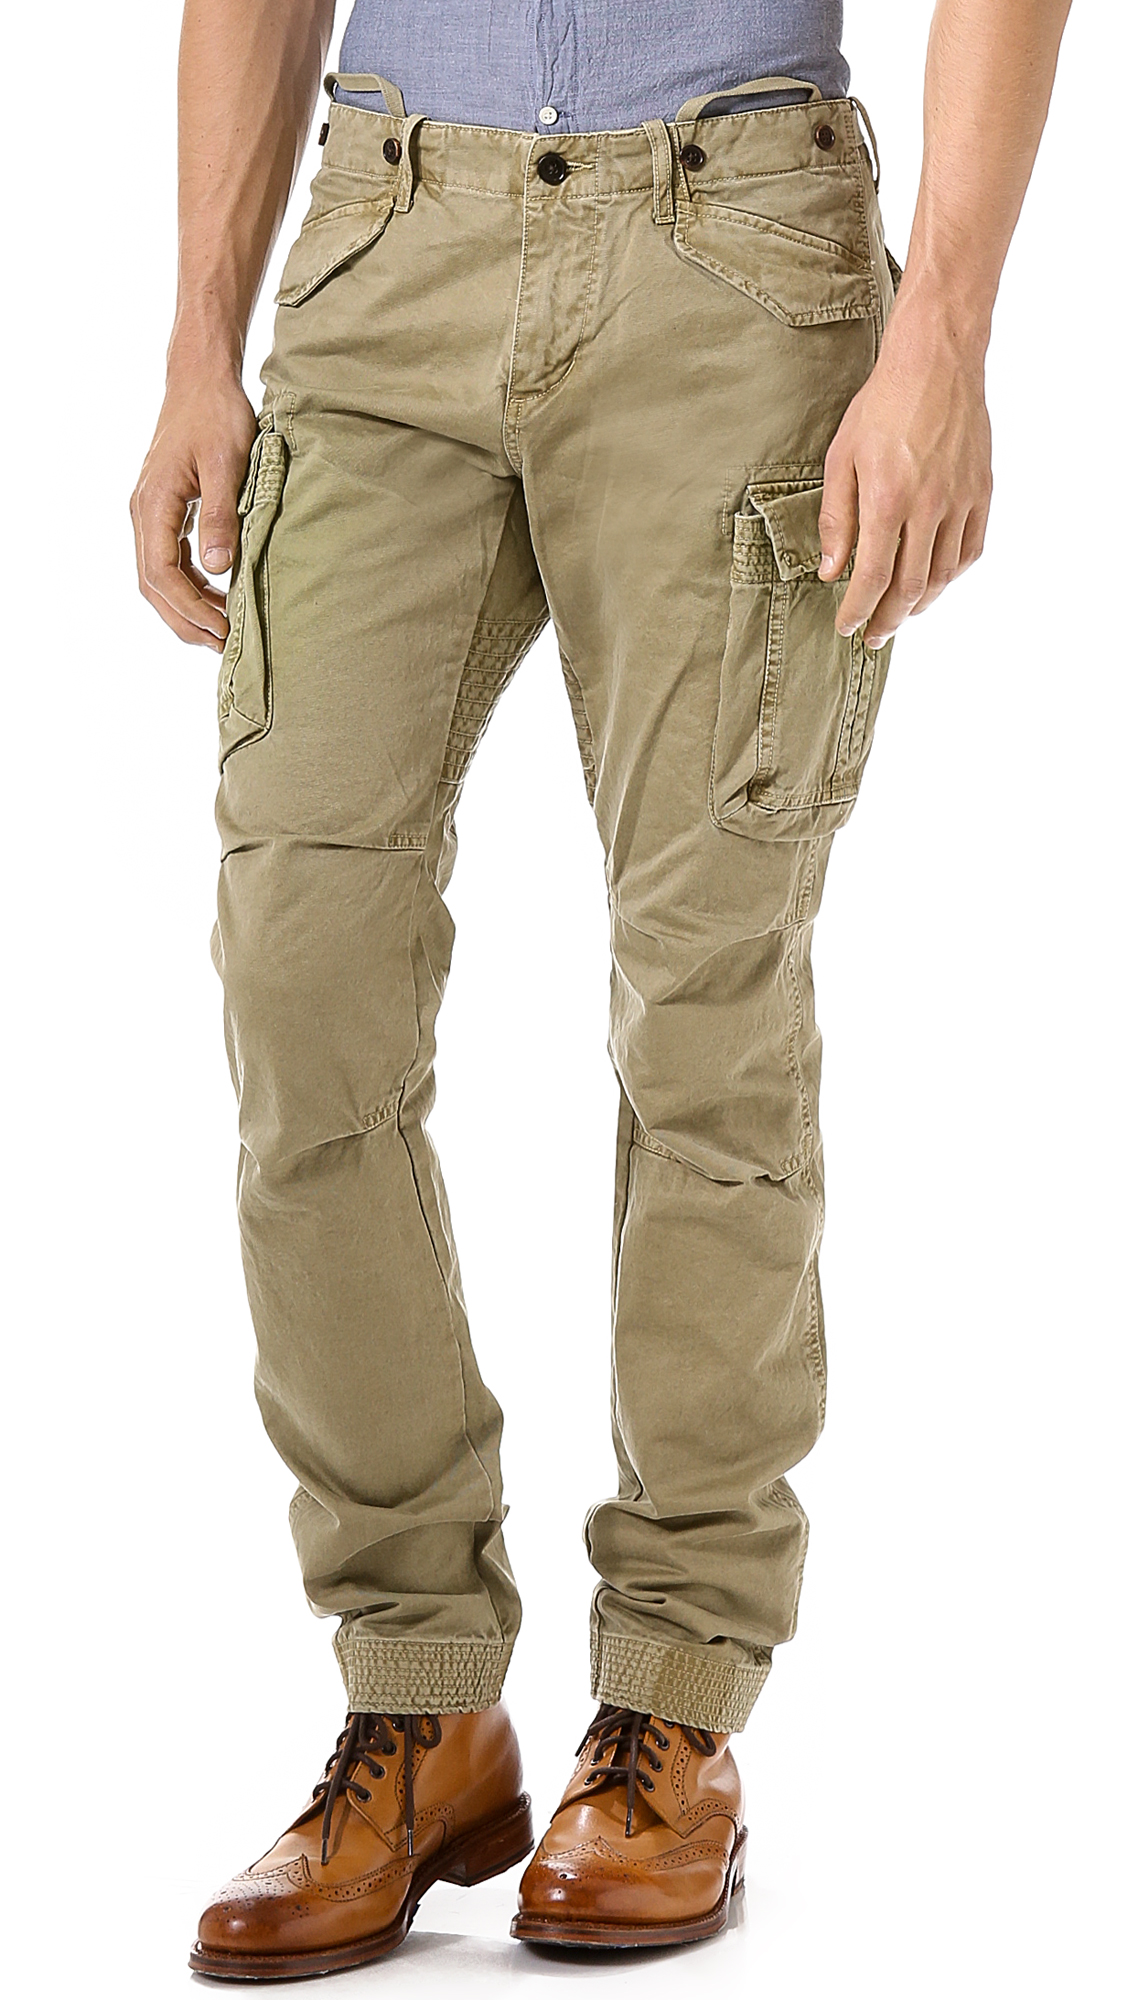 GANT The Mb Perfect Cargo Pants in Army Green (Green) for Men - Lyst